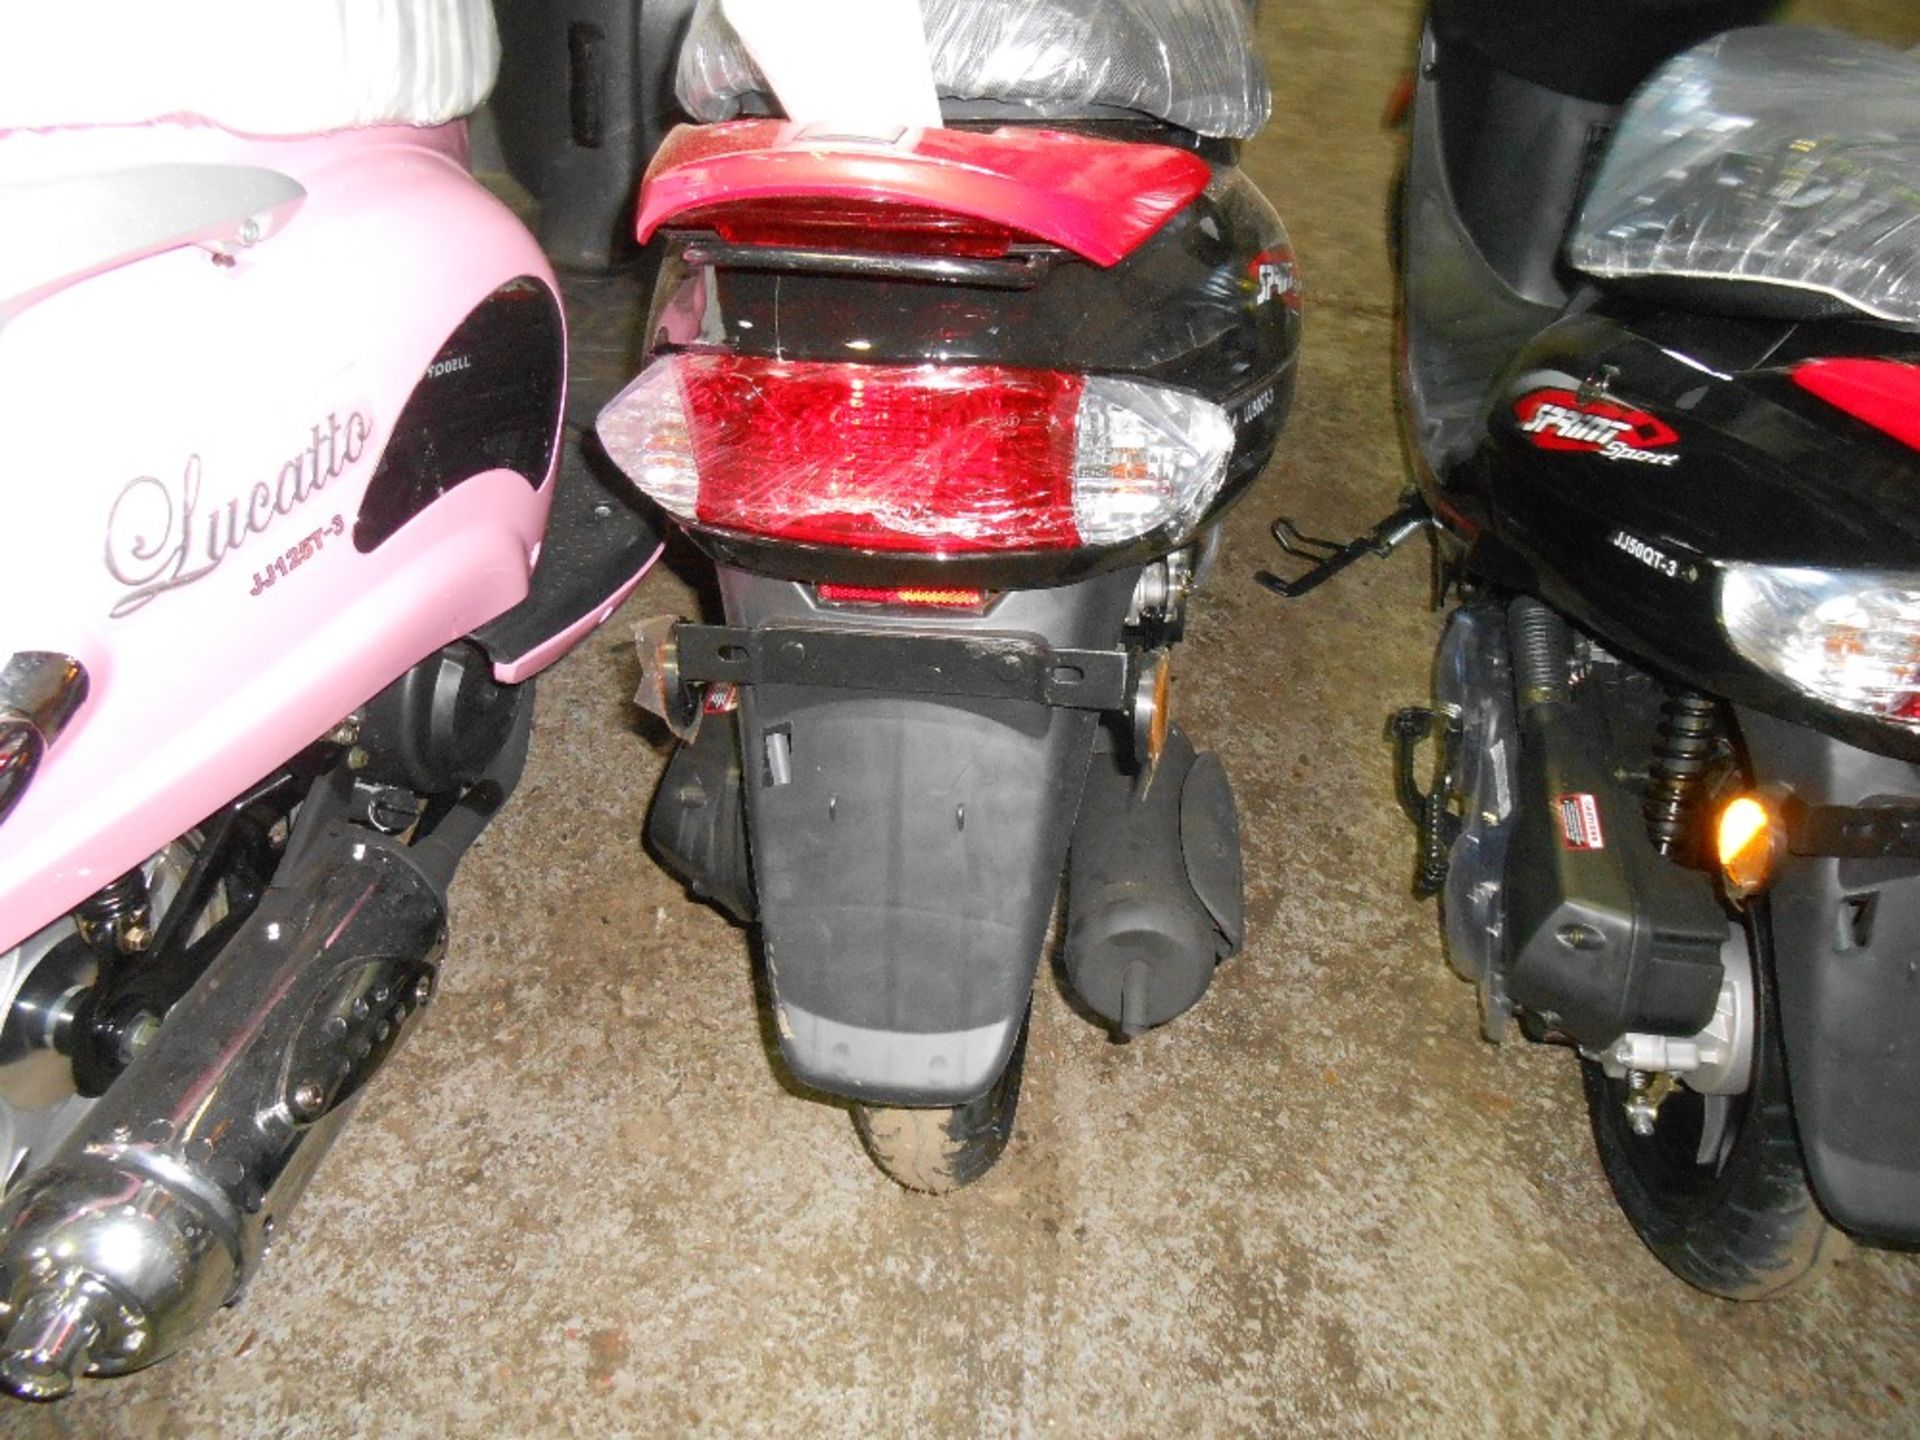 Sprint Sport 50cc scooter black and red SN: 2834 unregistered c/w keys